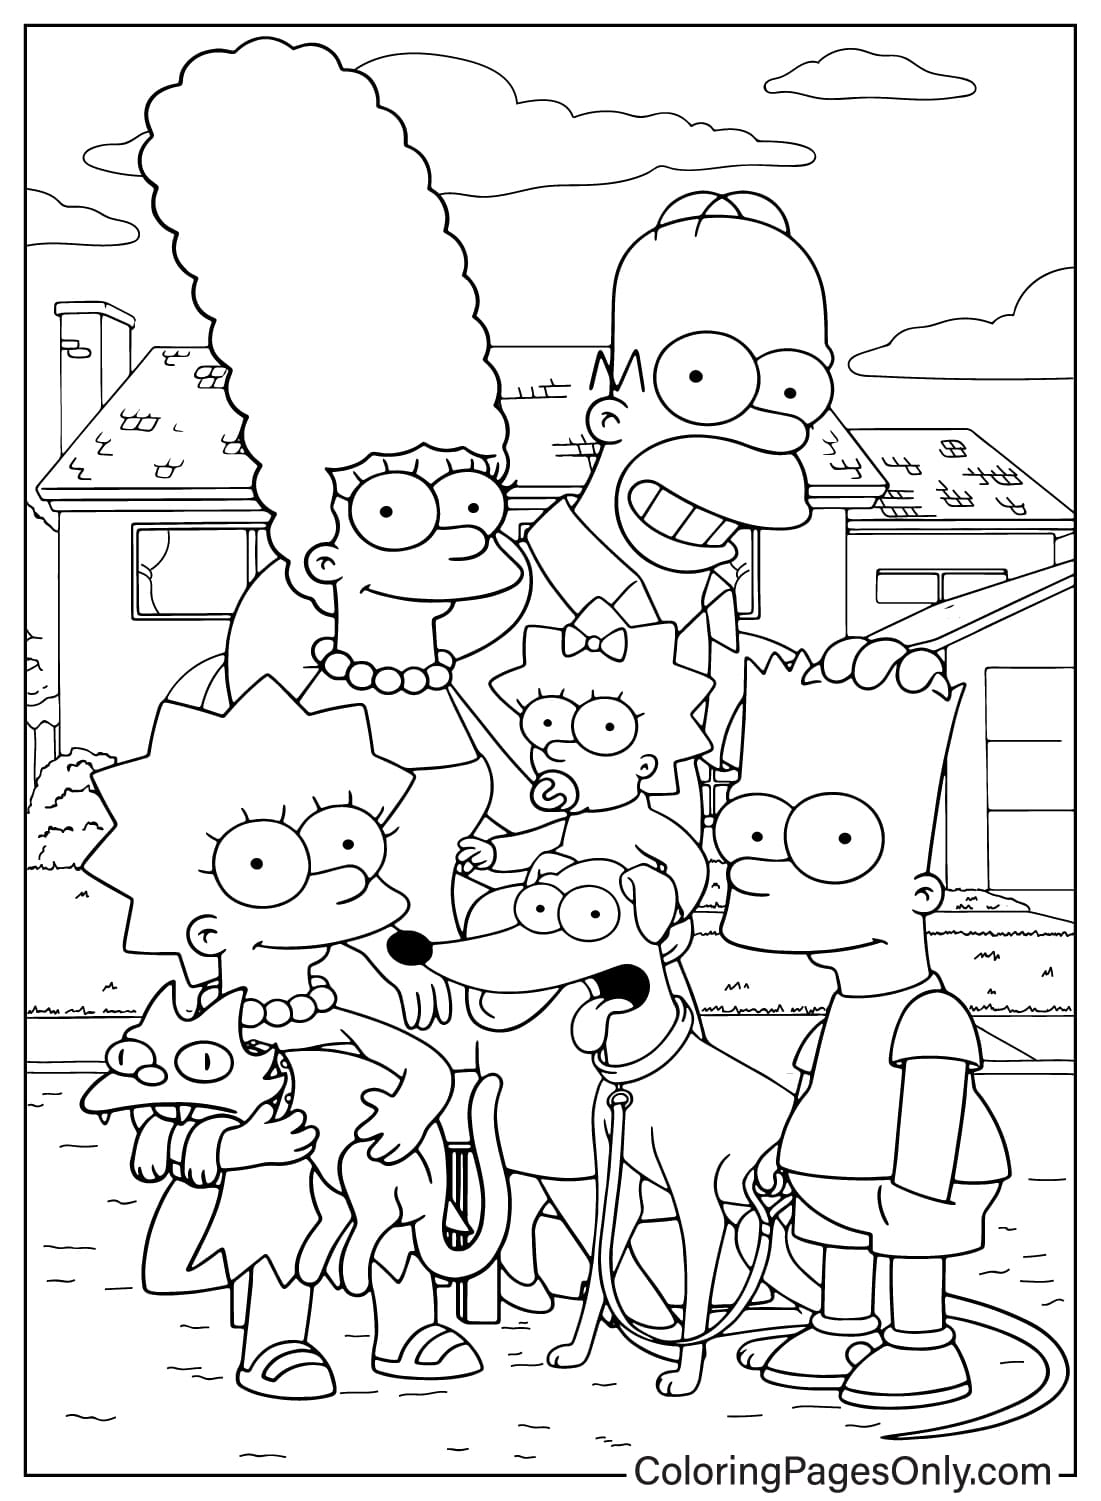 Family Simpsons Coloring Page